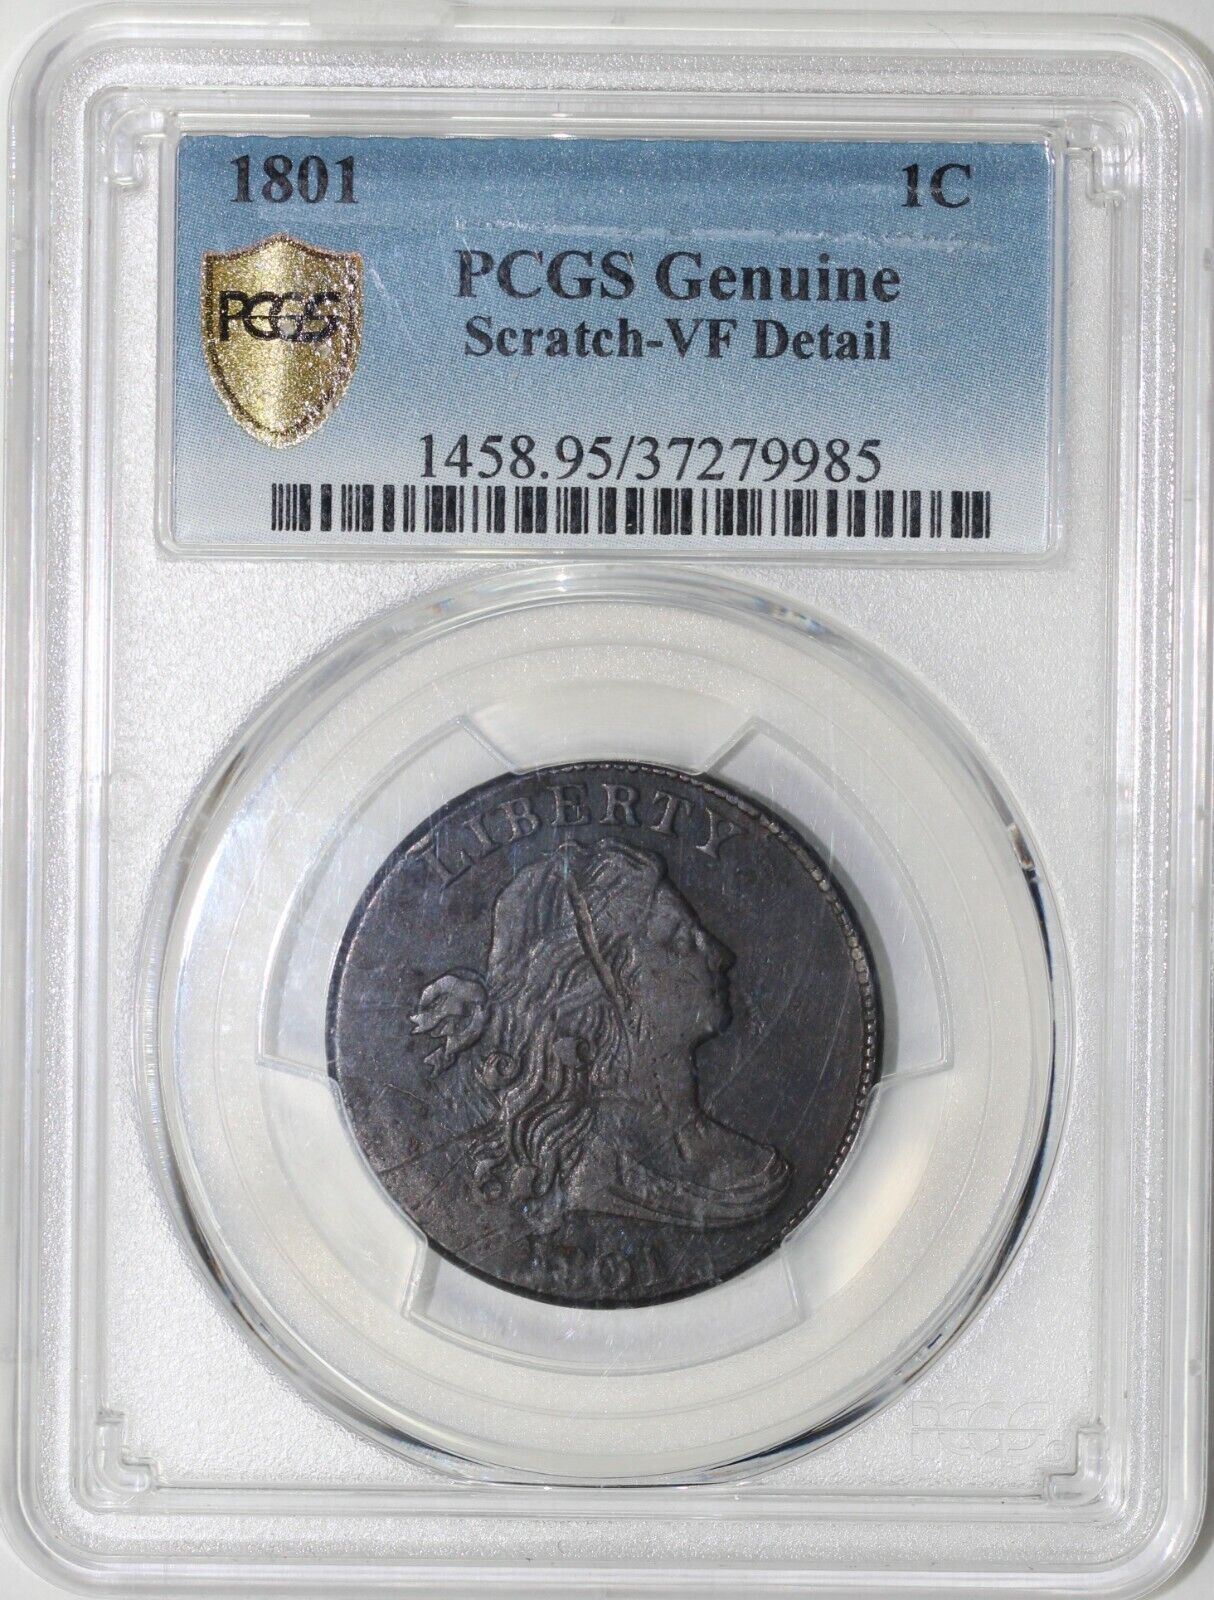 1801 1c S-215 Draped Bust Lage Cent PCGS SECURE VF DETAIL SCRATCH